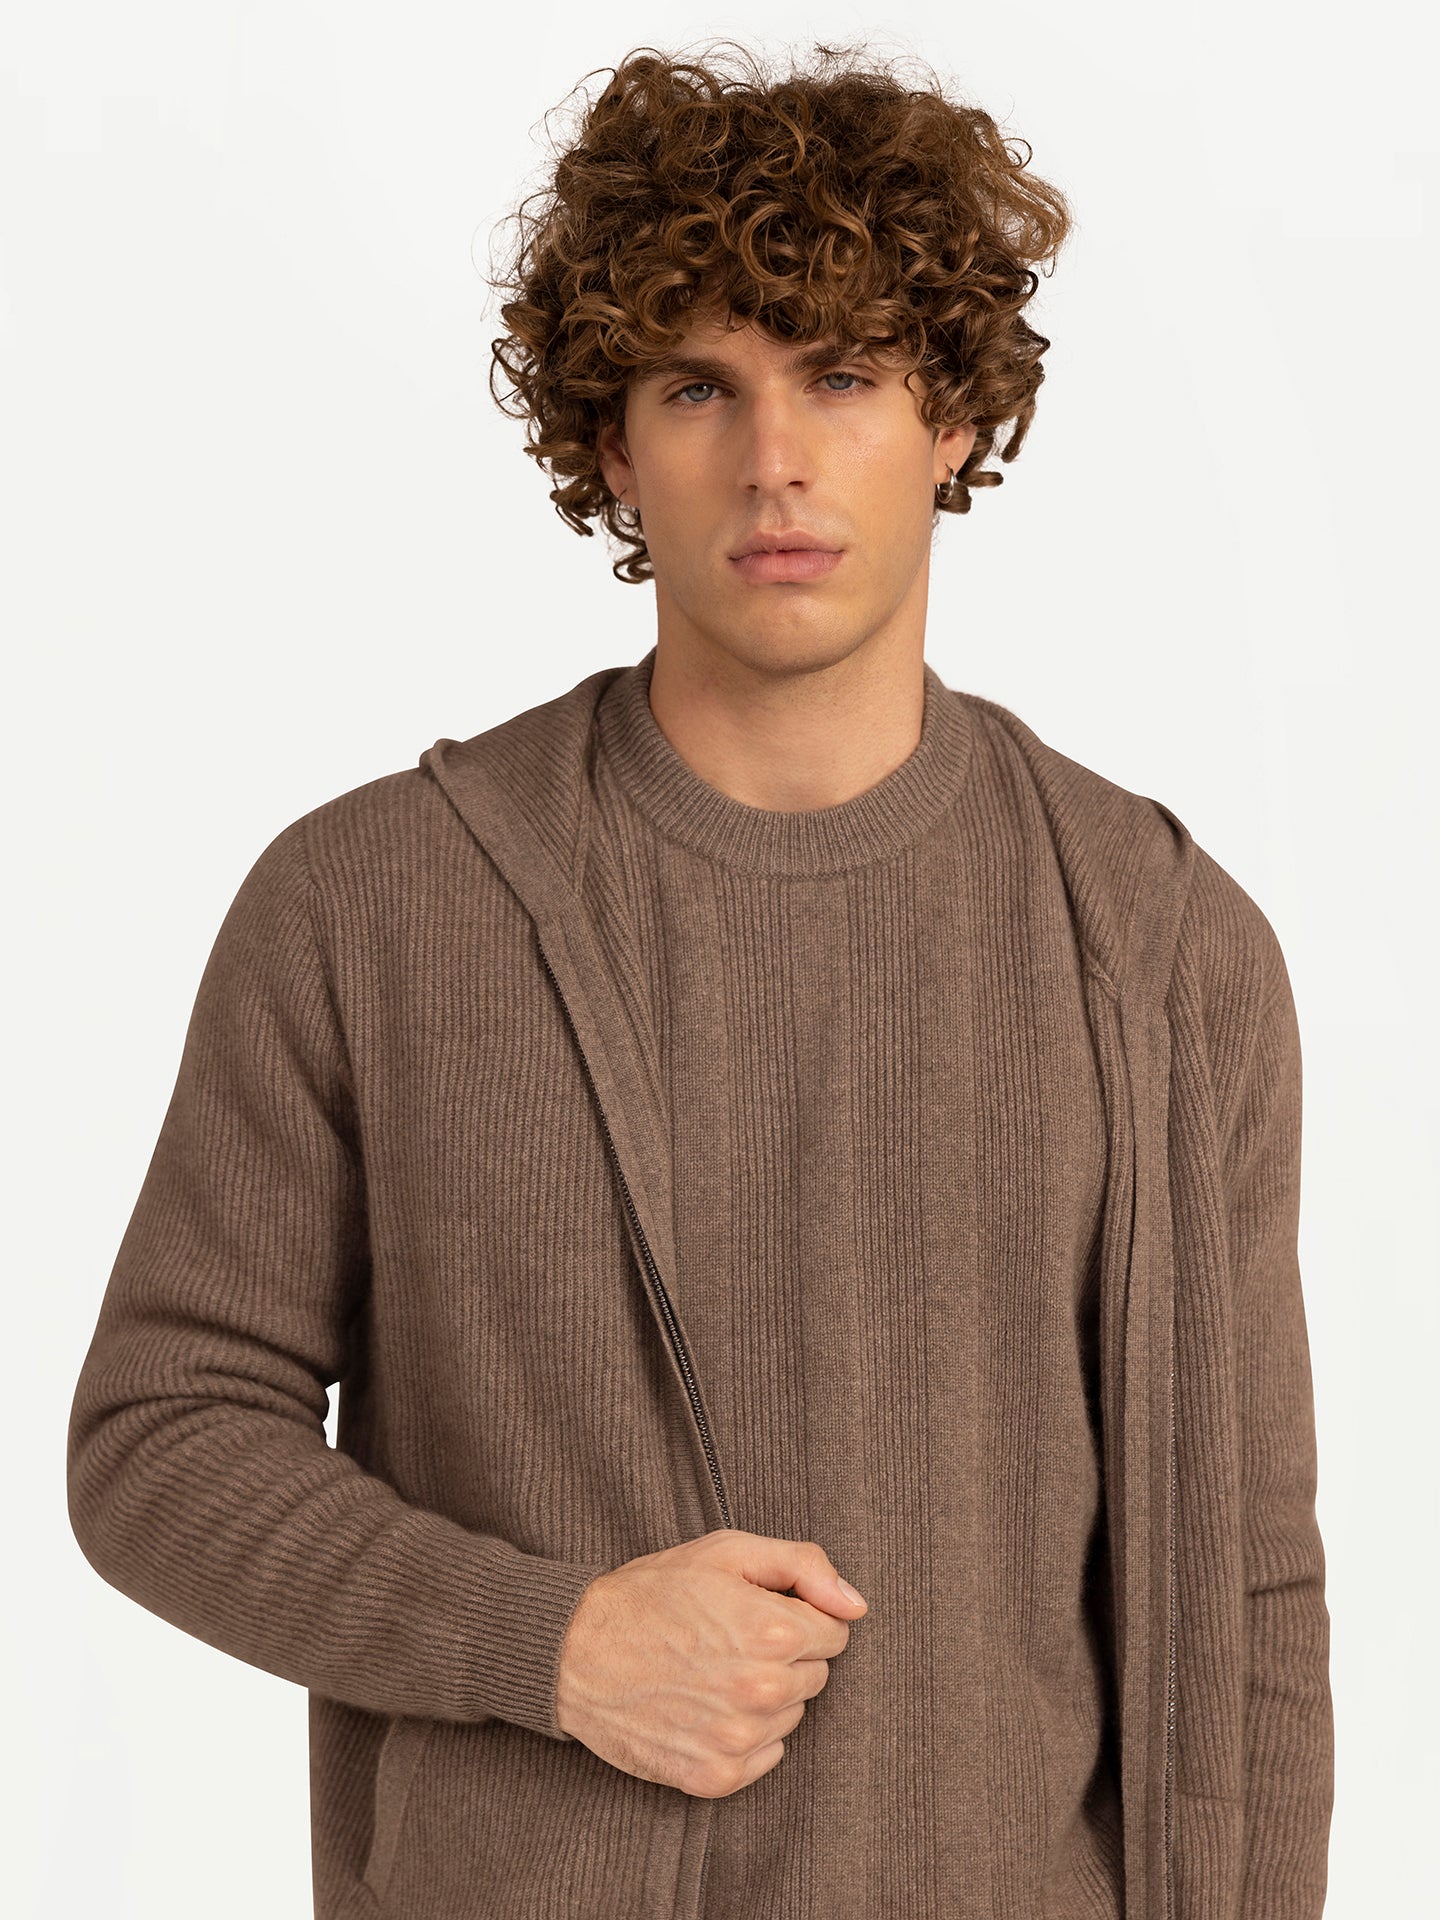 Men's Organic Cashmere Zip Hoodie with Pockets Taupe - Gobi Cashmere